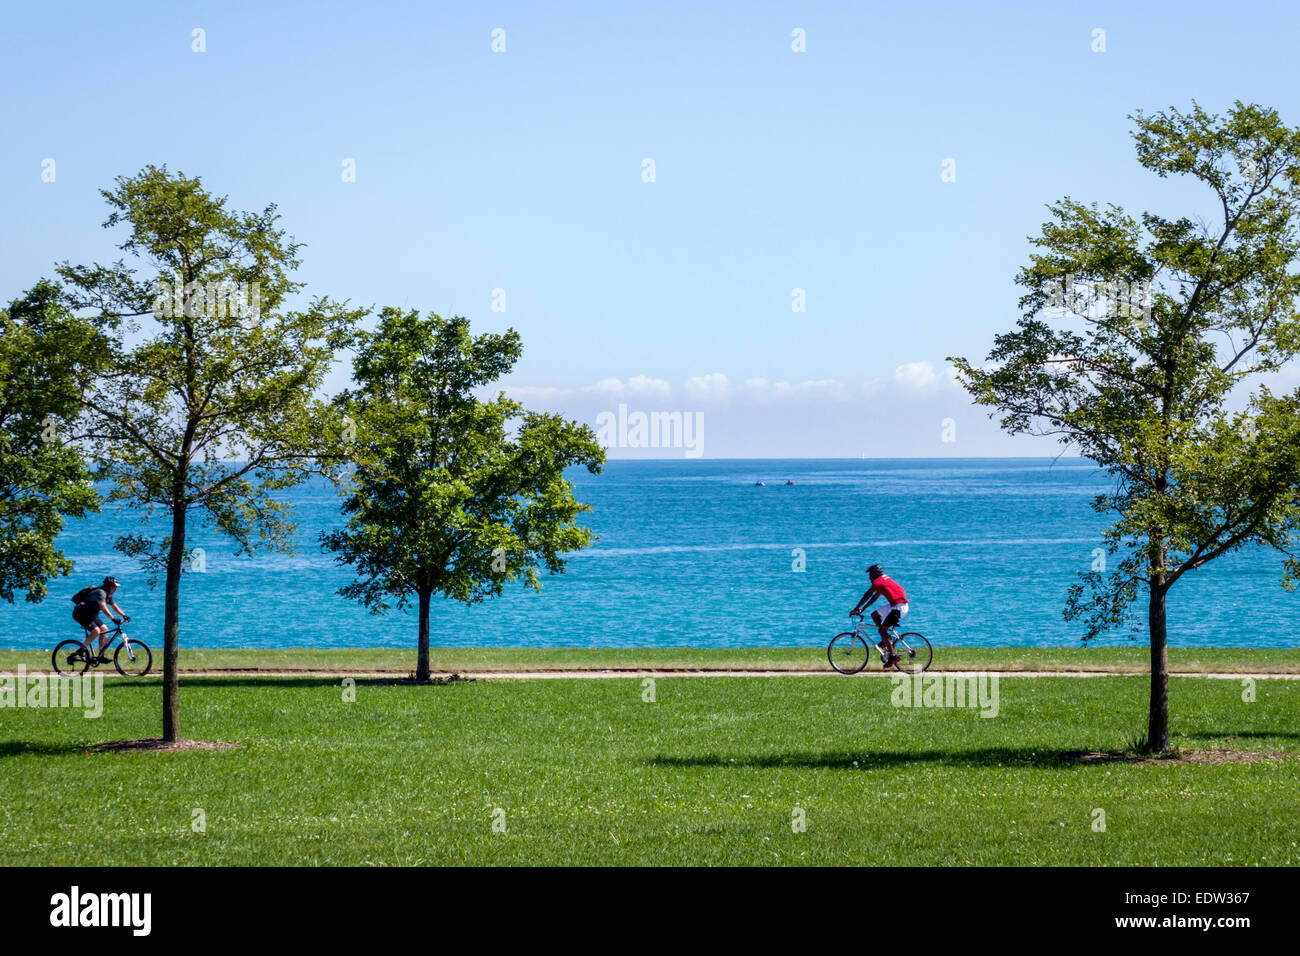 Chicago Illinois,South Side,Lake Michigan,39th Street Beach,Lakefront Trail,water,trees,bikers,riding,bicycle,bicycling,riding,biking,rider,rider,IL14 Stock Photo